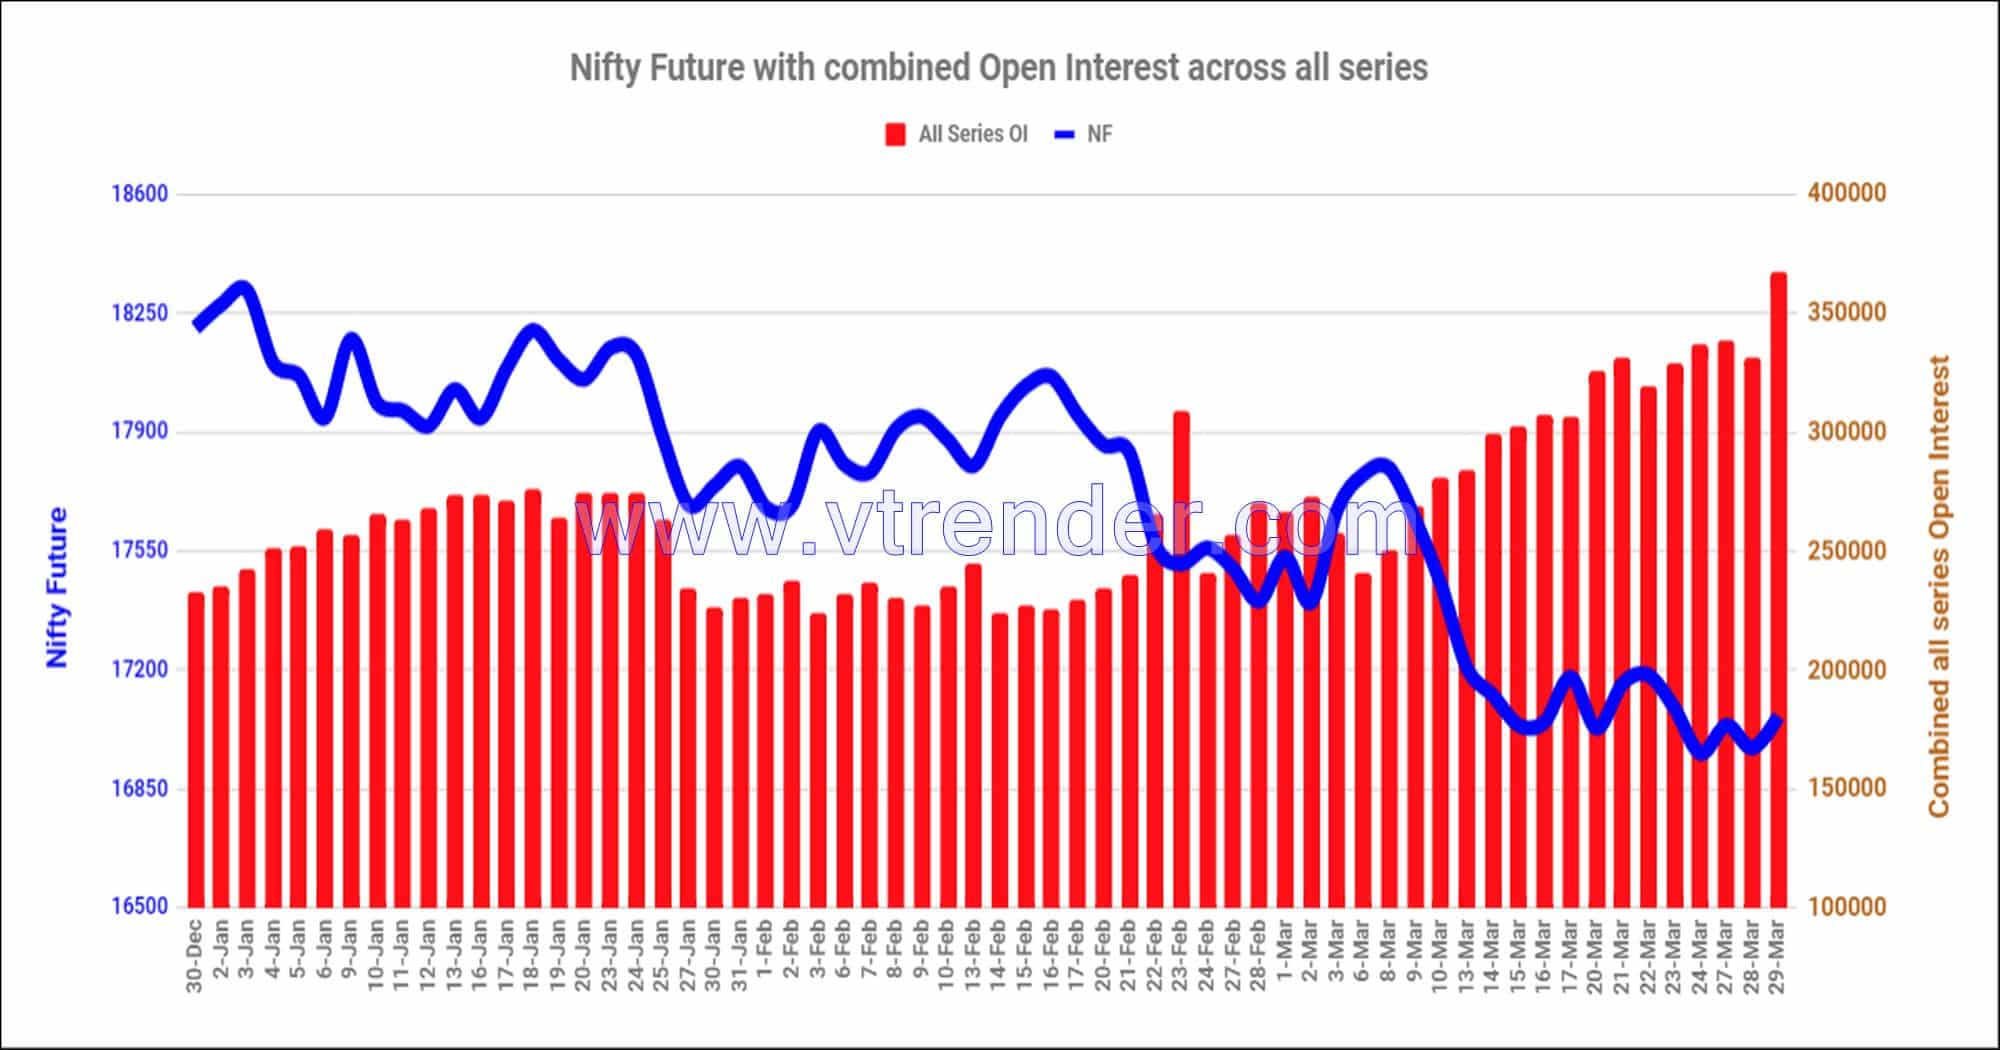 Nf29Mar Nifty And Banknifty Futures With All Series Combined Open Interest – 29Th Mar 2023 Banknifty, Nifty, Open Interest